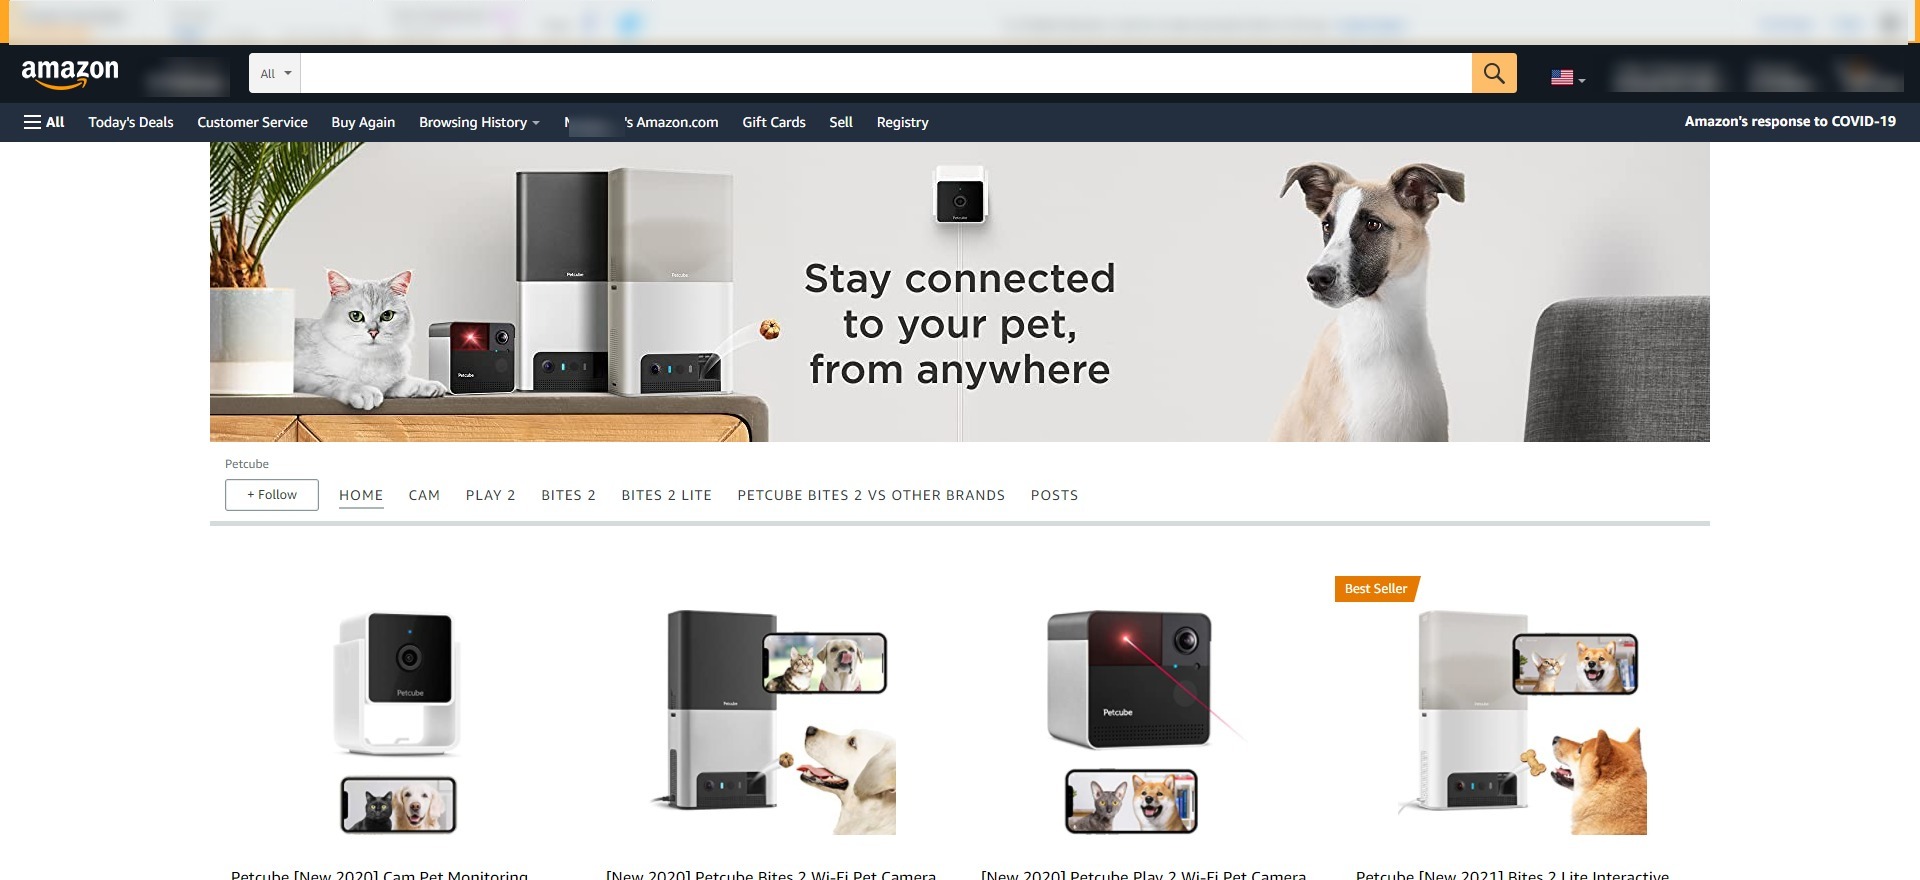 Amazon eCommerce website showcasing as a storefront